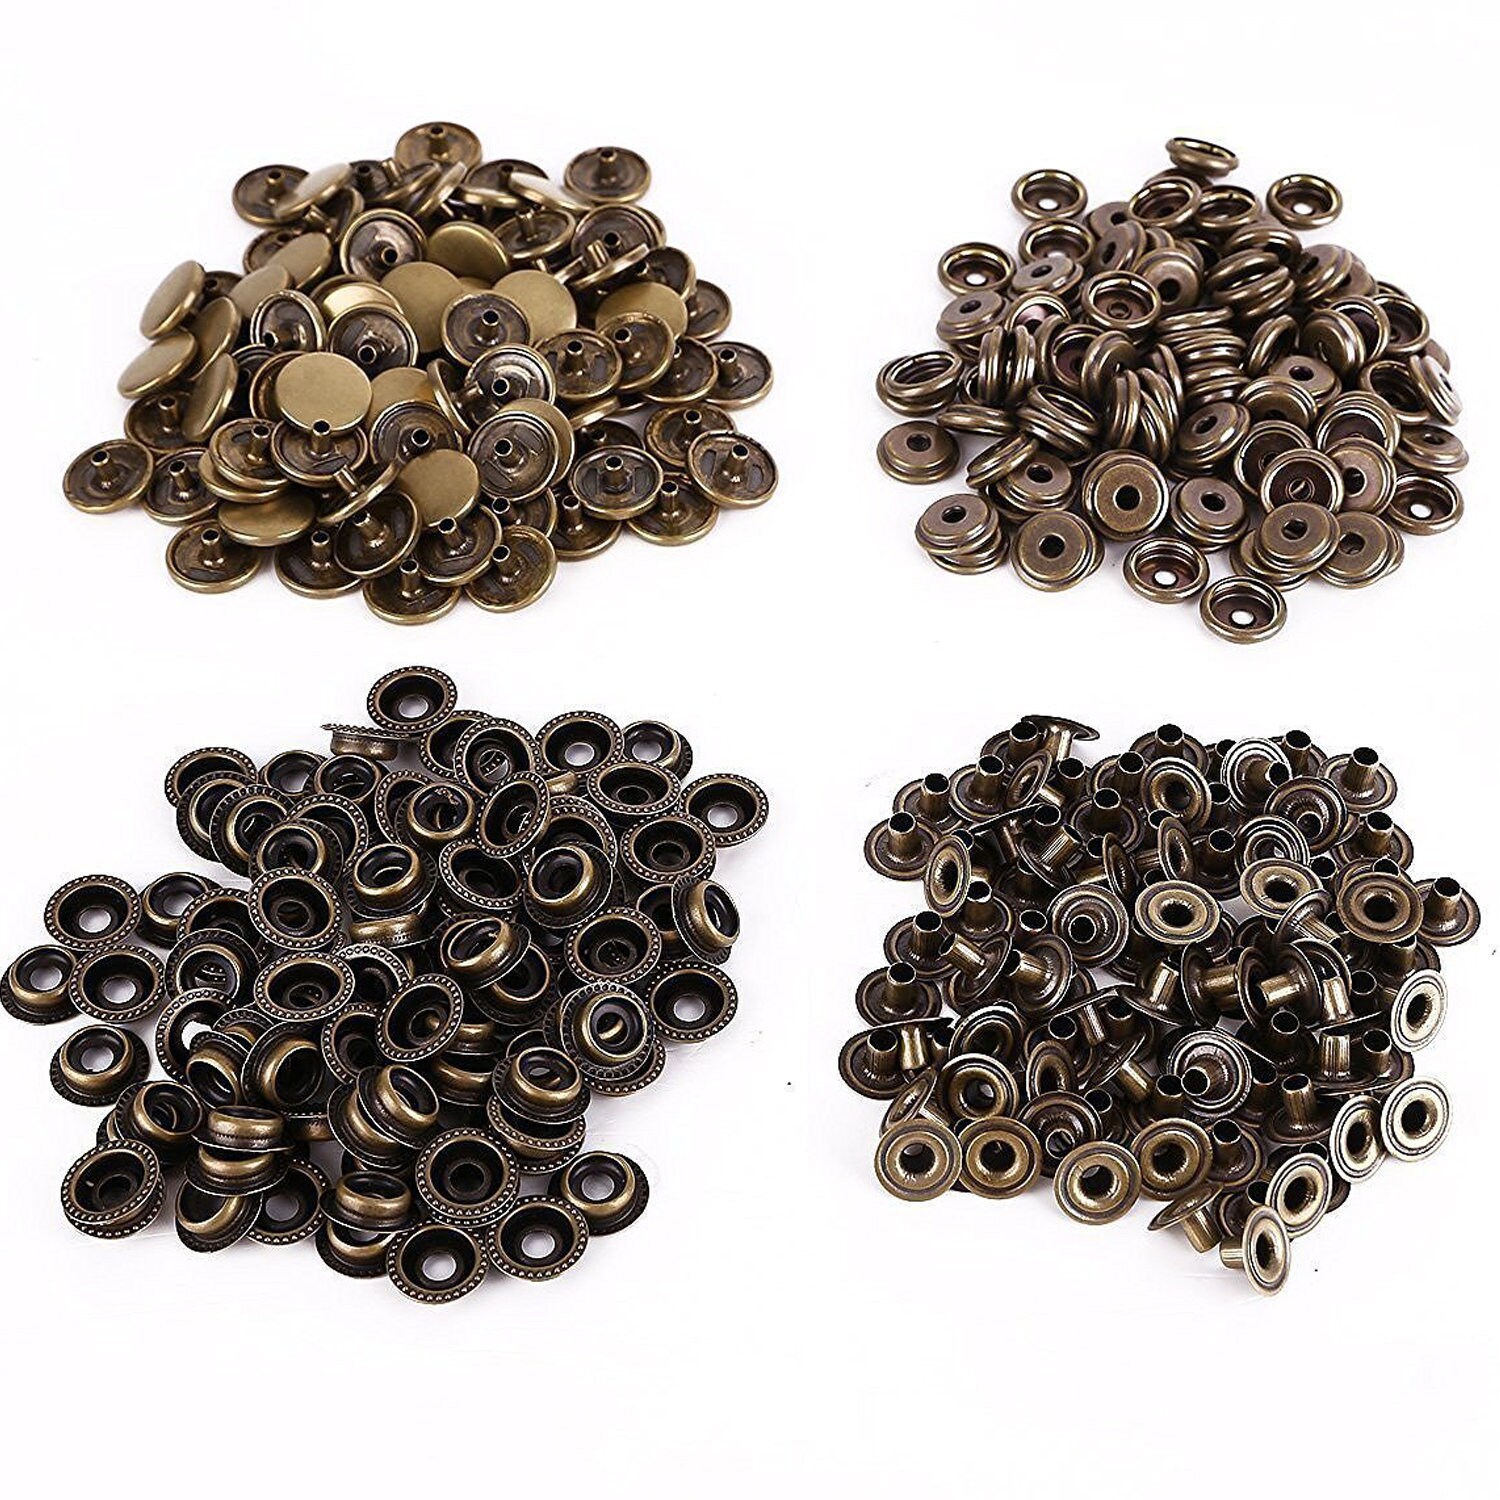 Trimming Shop 20mm S Spring Press Studs 4 Part, Durable and Lightweight, Metal  Snap Buttons Fasteners for Jackets, DIY Leathercrafts, Sewing Clothing,  Purses, Gunmetal Black, 10pcs 